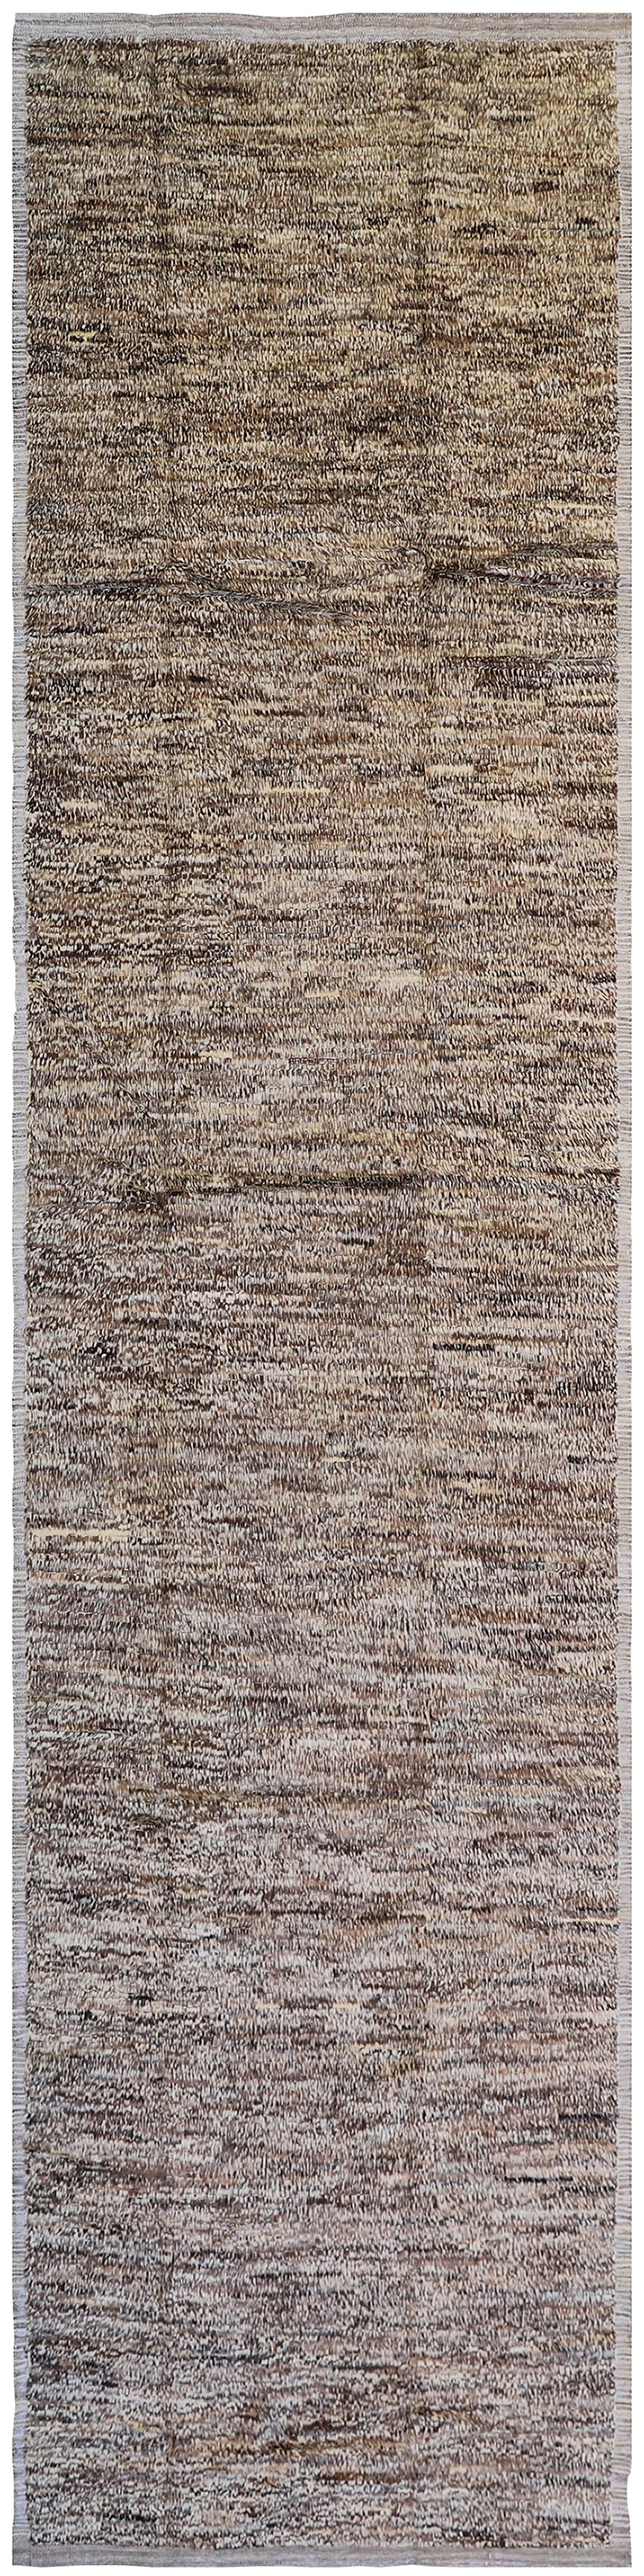 4'x16' Stria Brown Shaggy Moroccan Style Ariana Barchi Collection Rug